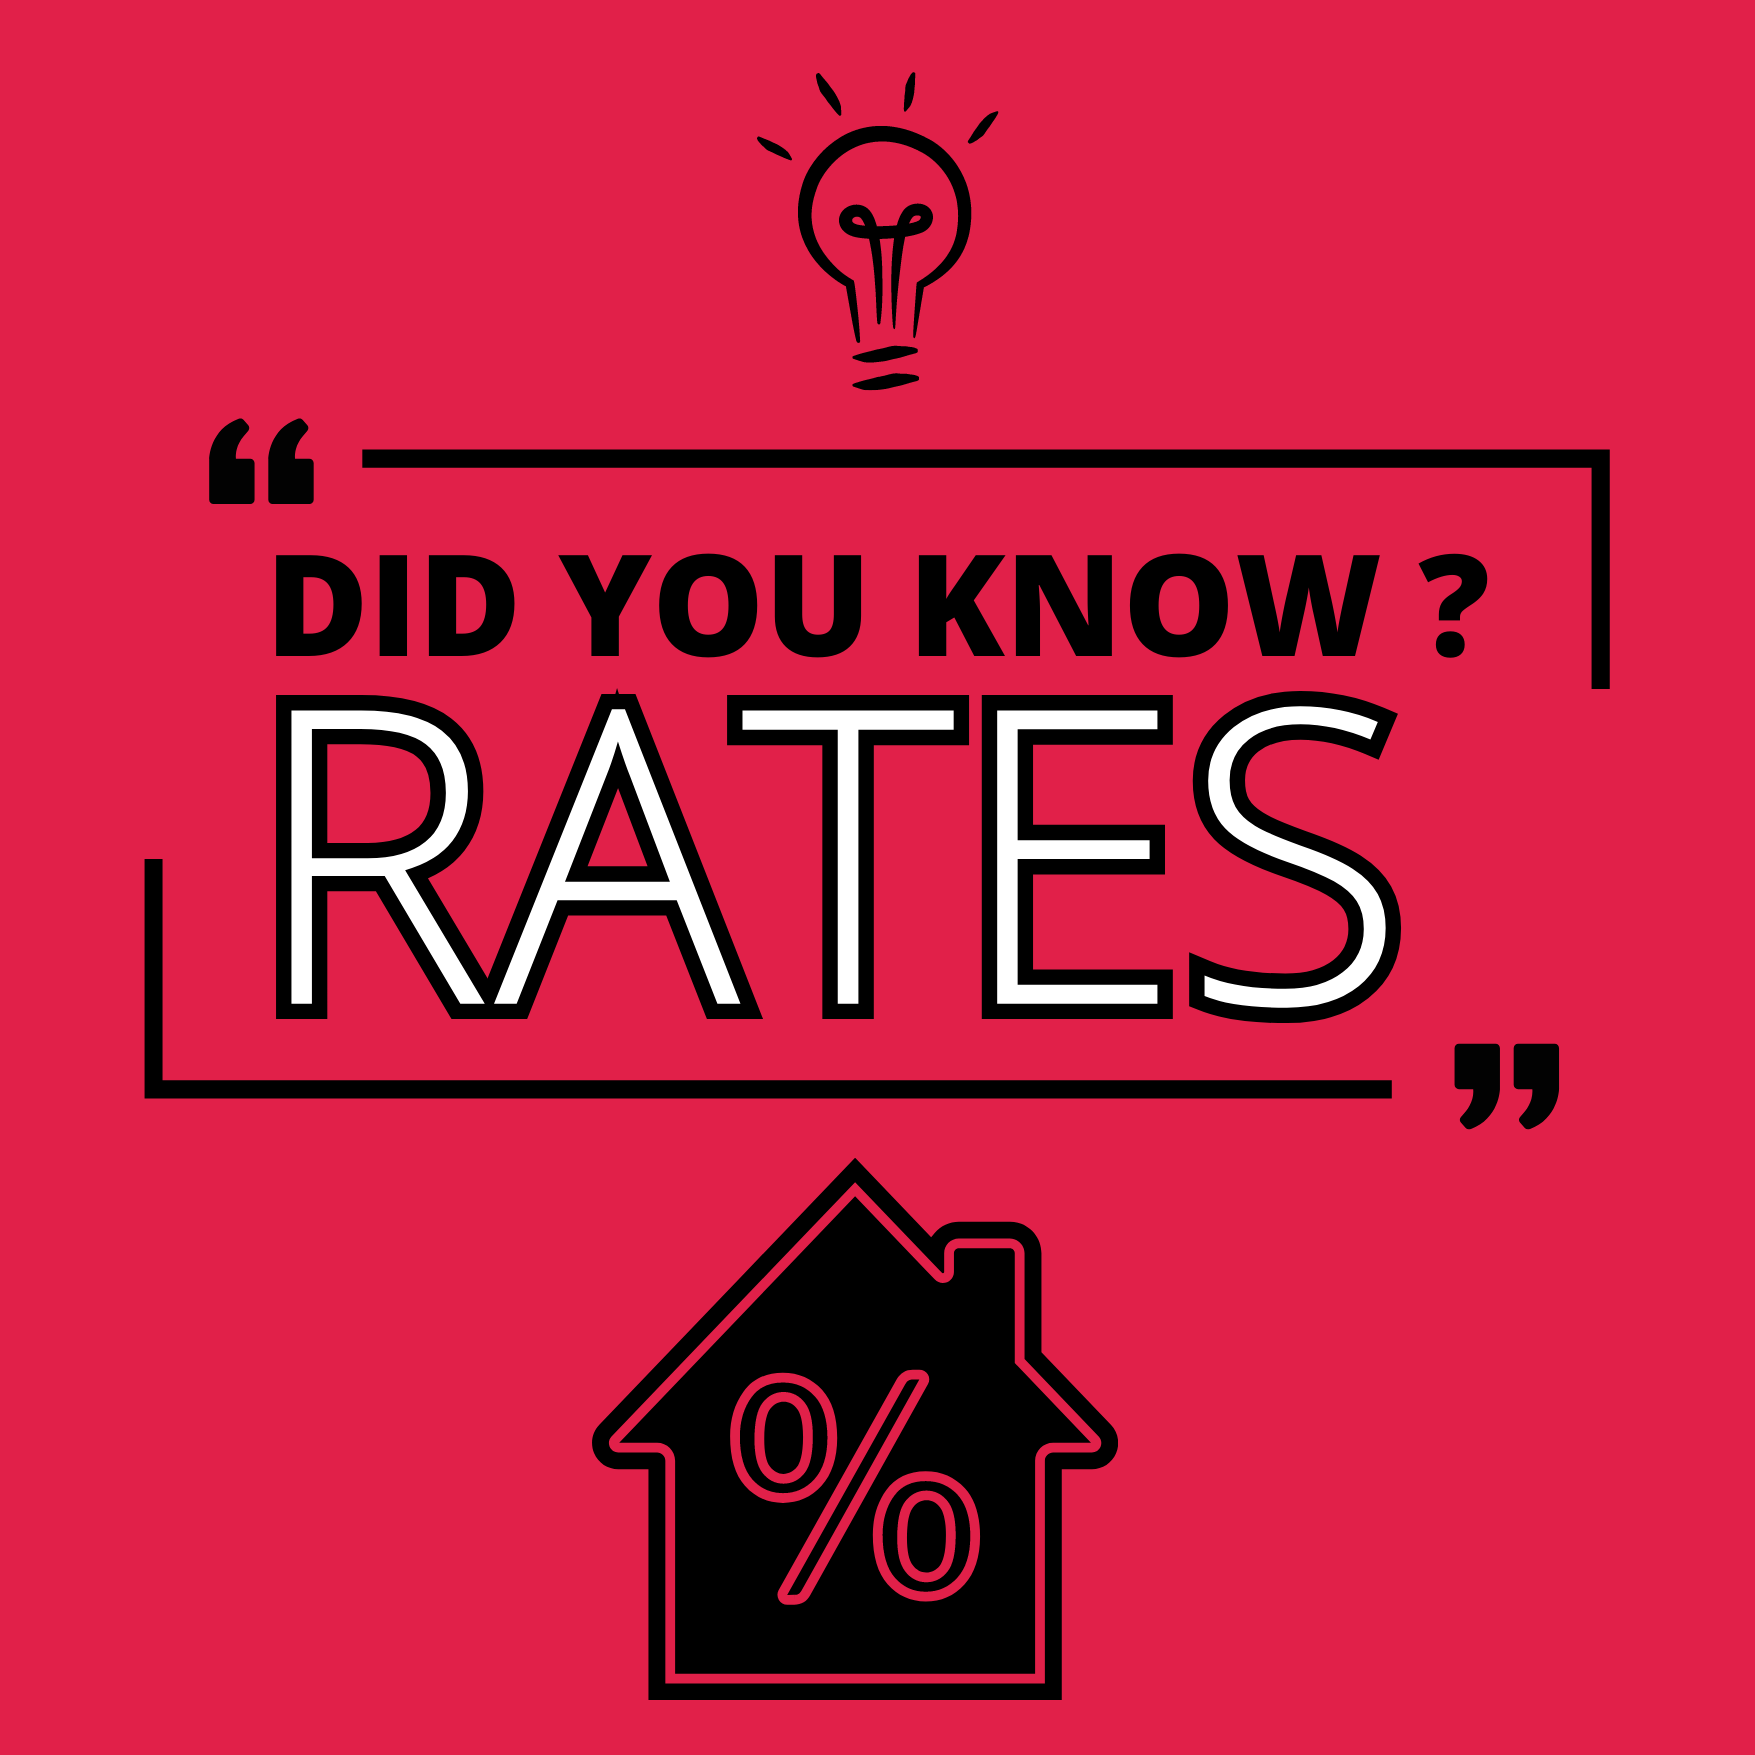 Did You Know? - Let's talk RATES